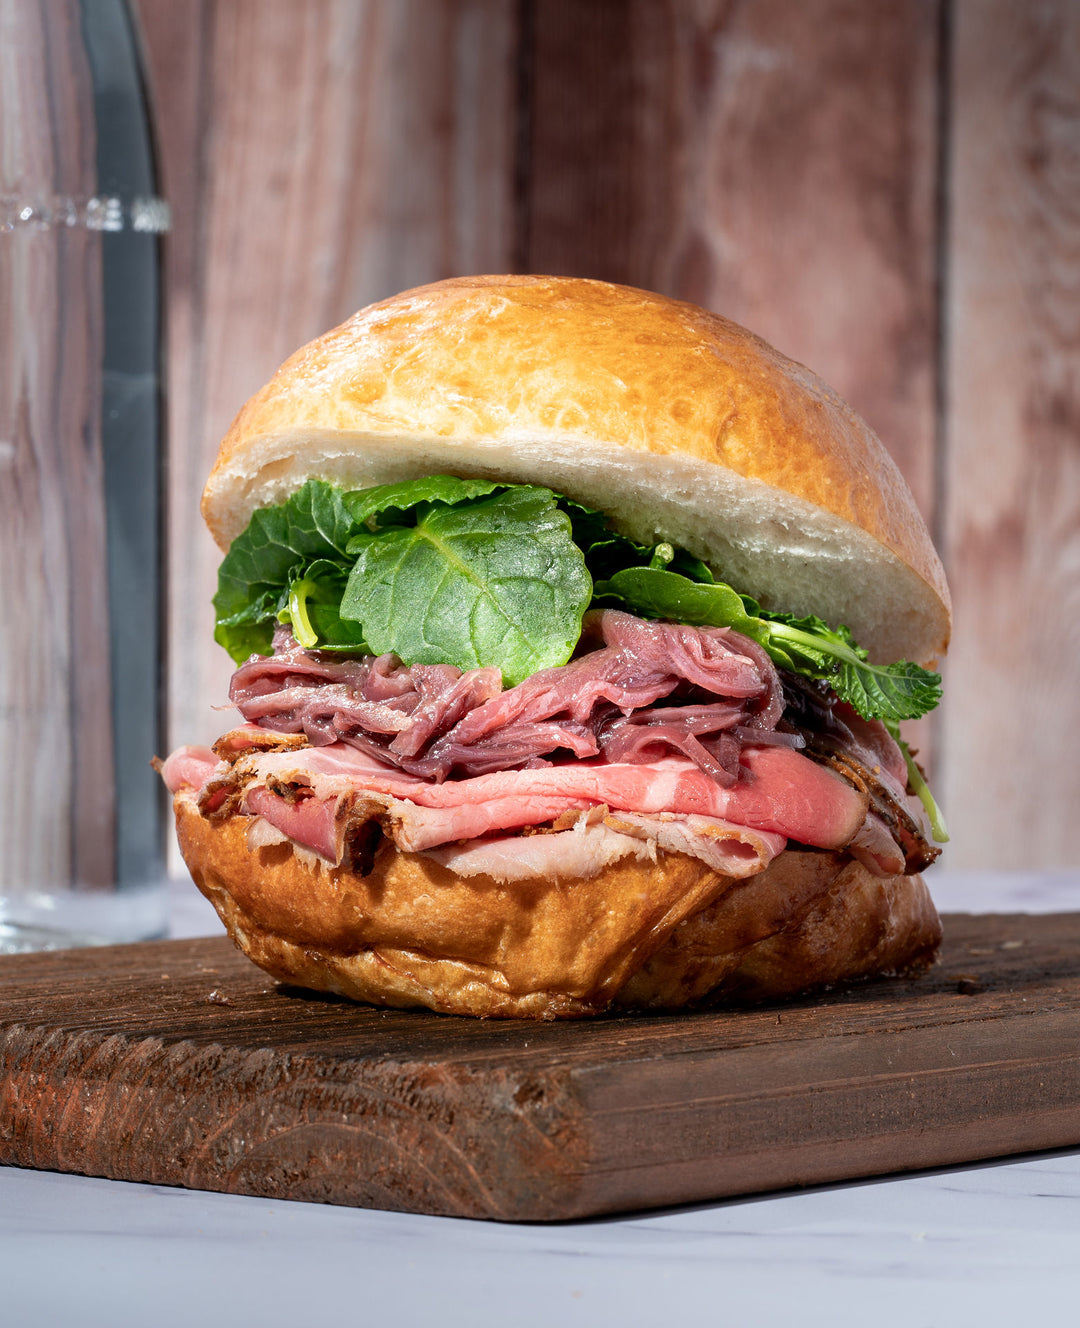 Chef Rosendale's Slow Roasted Beef Sandwich